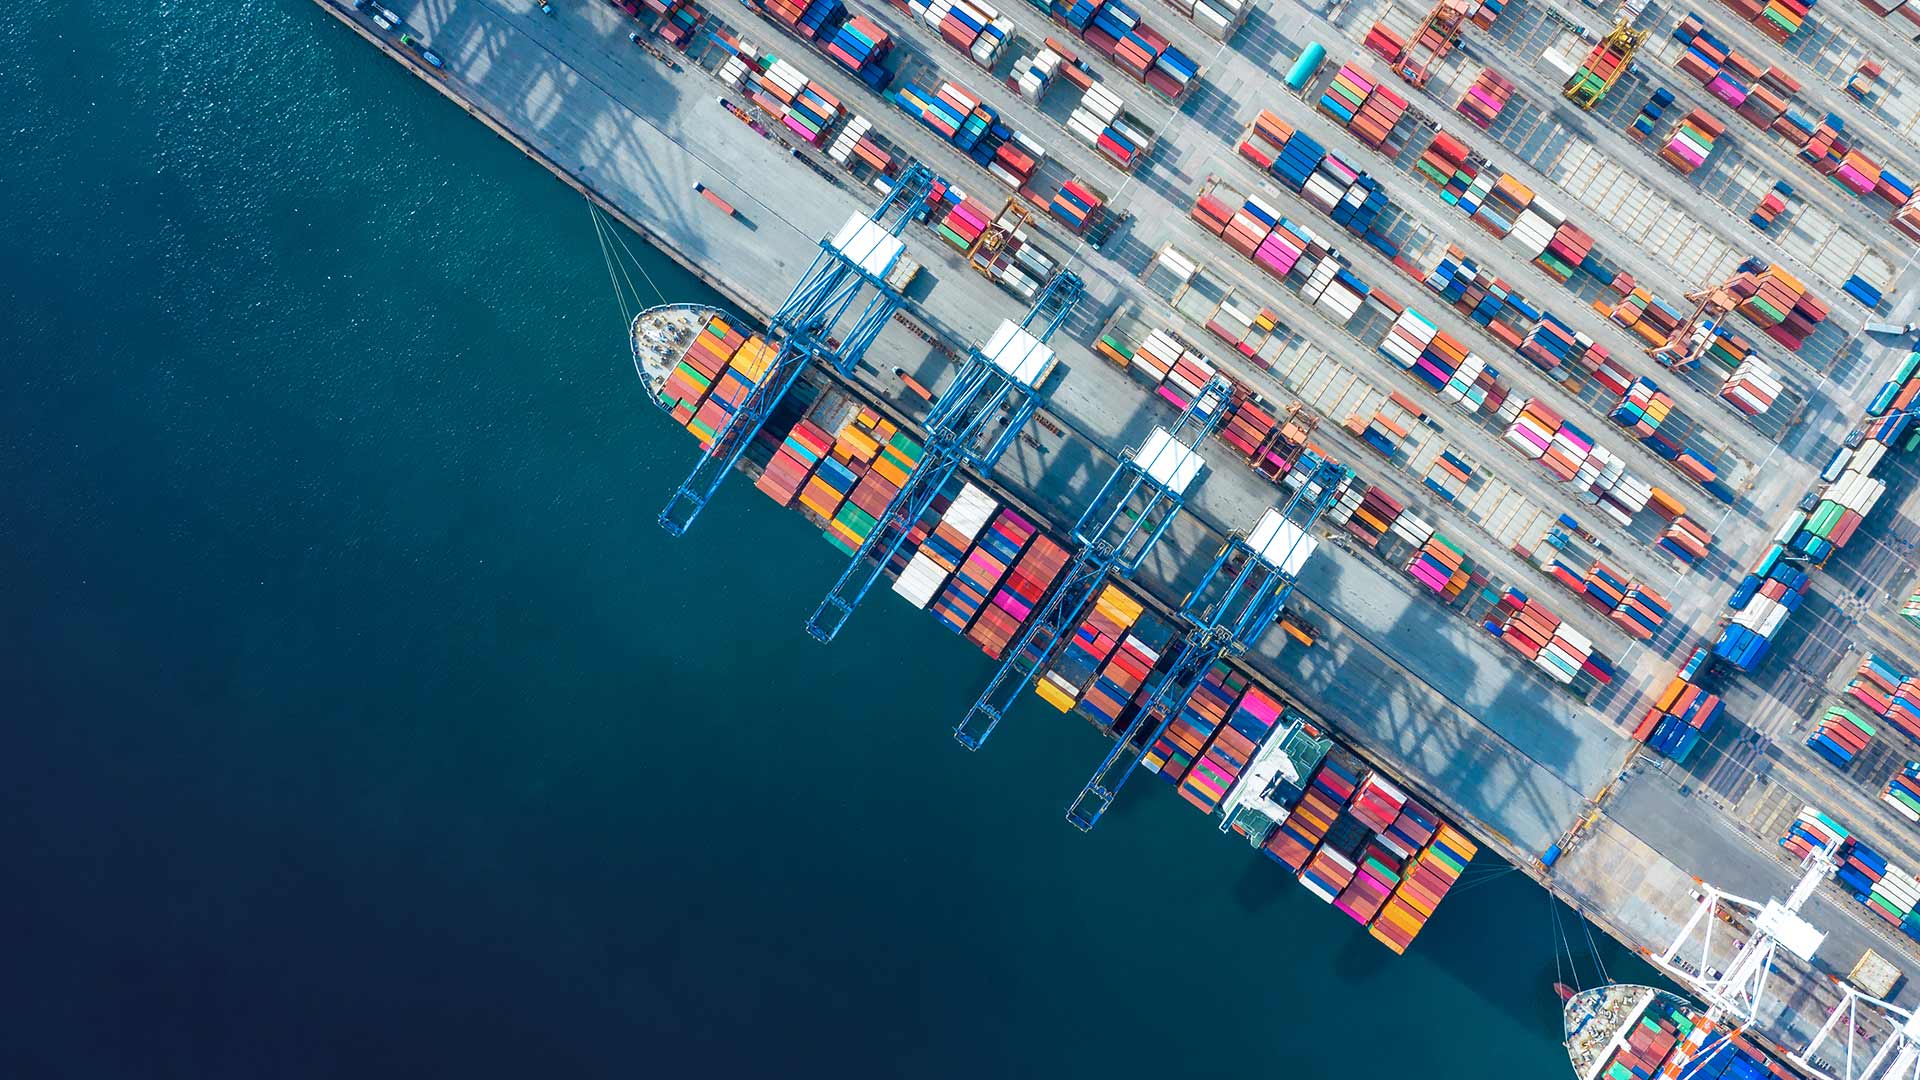 Image: Perspective from above on a container ship in the port